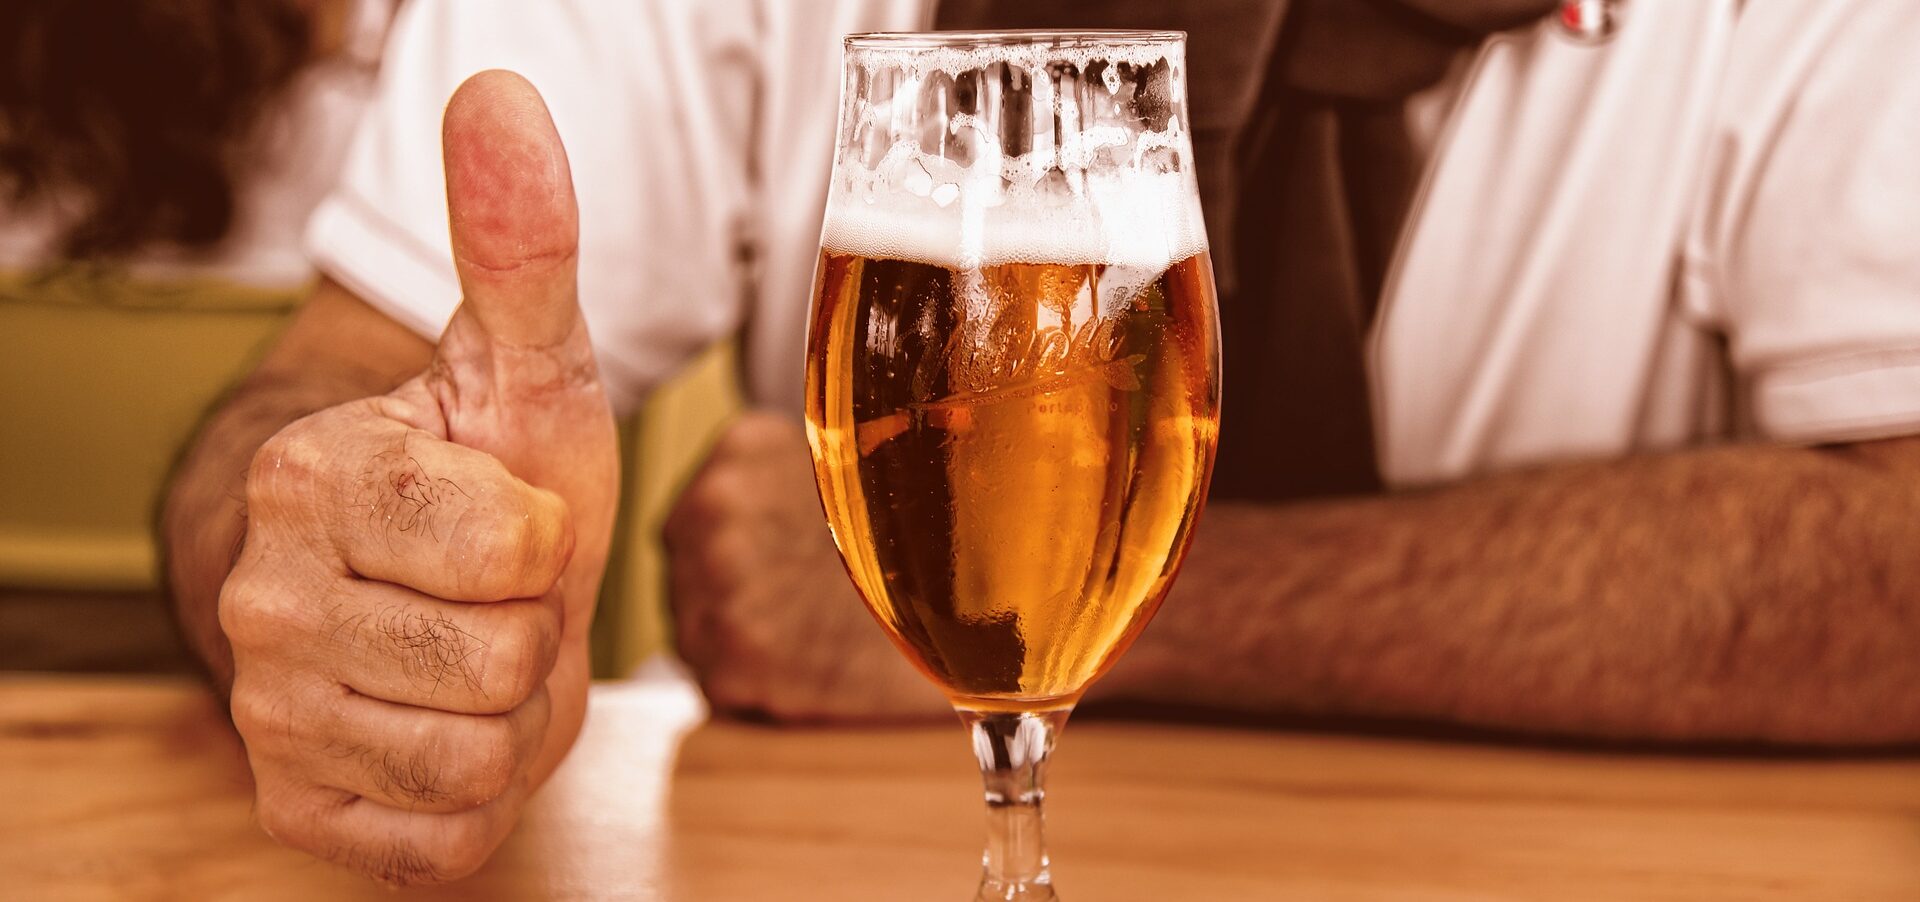 a man gives a thumbs up next to a glass of beer